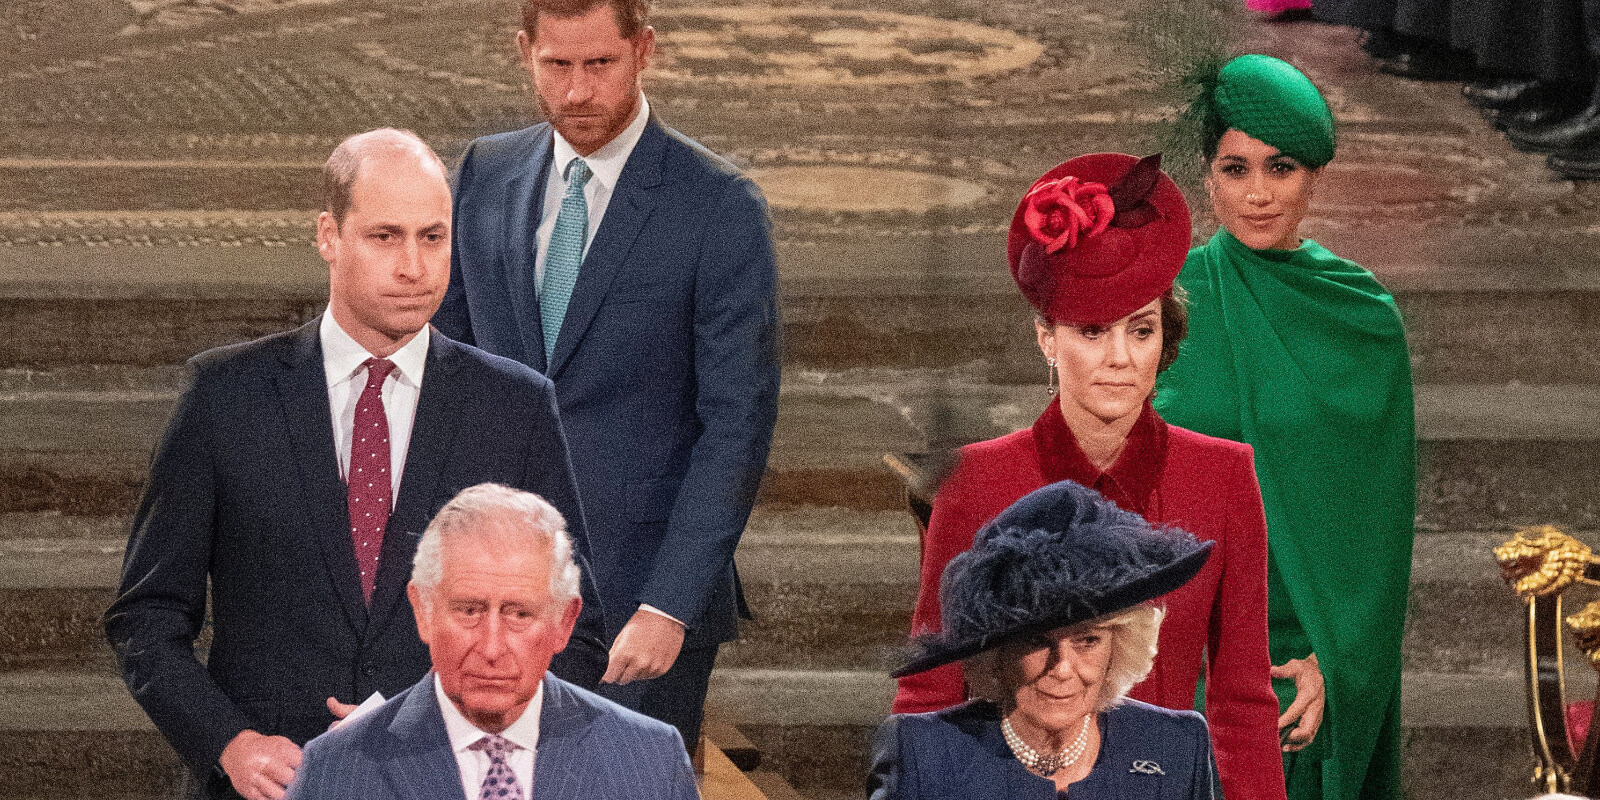 Prince Harry, Meghan Markle, Prince William, Kate Middleton, King Charles, and Camilla Parker Bowles the annual Commonwealth Service in London on March 9, 2020.